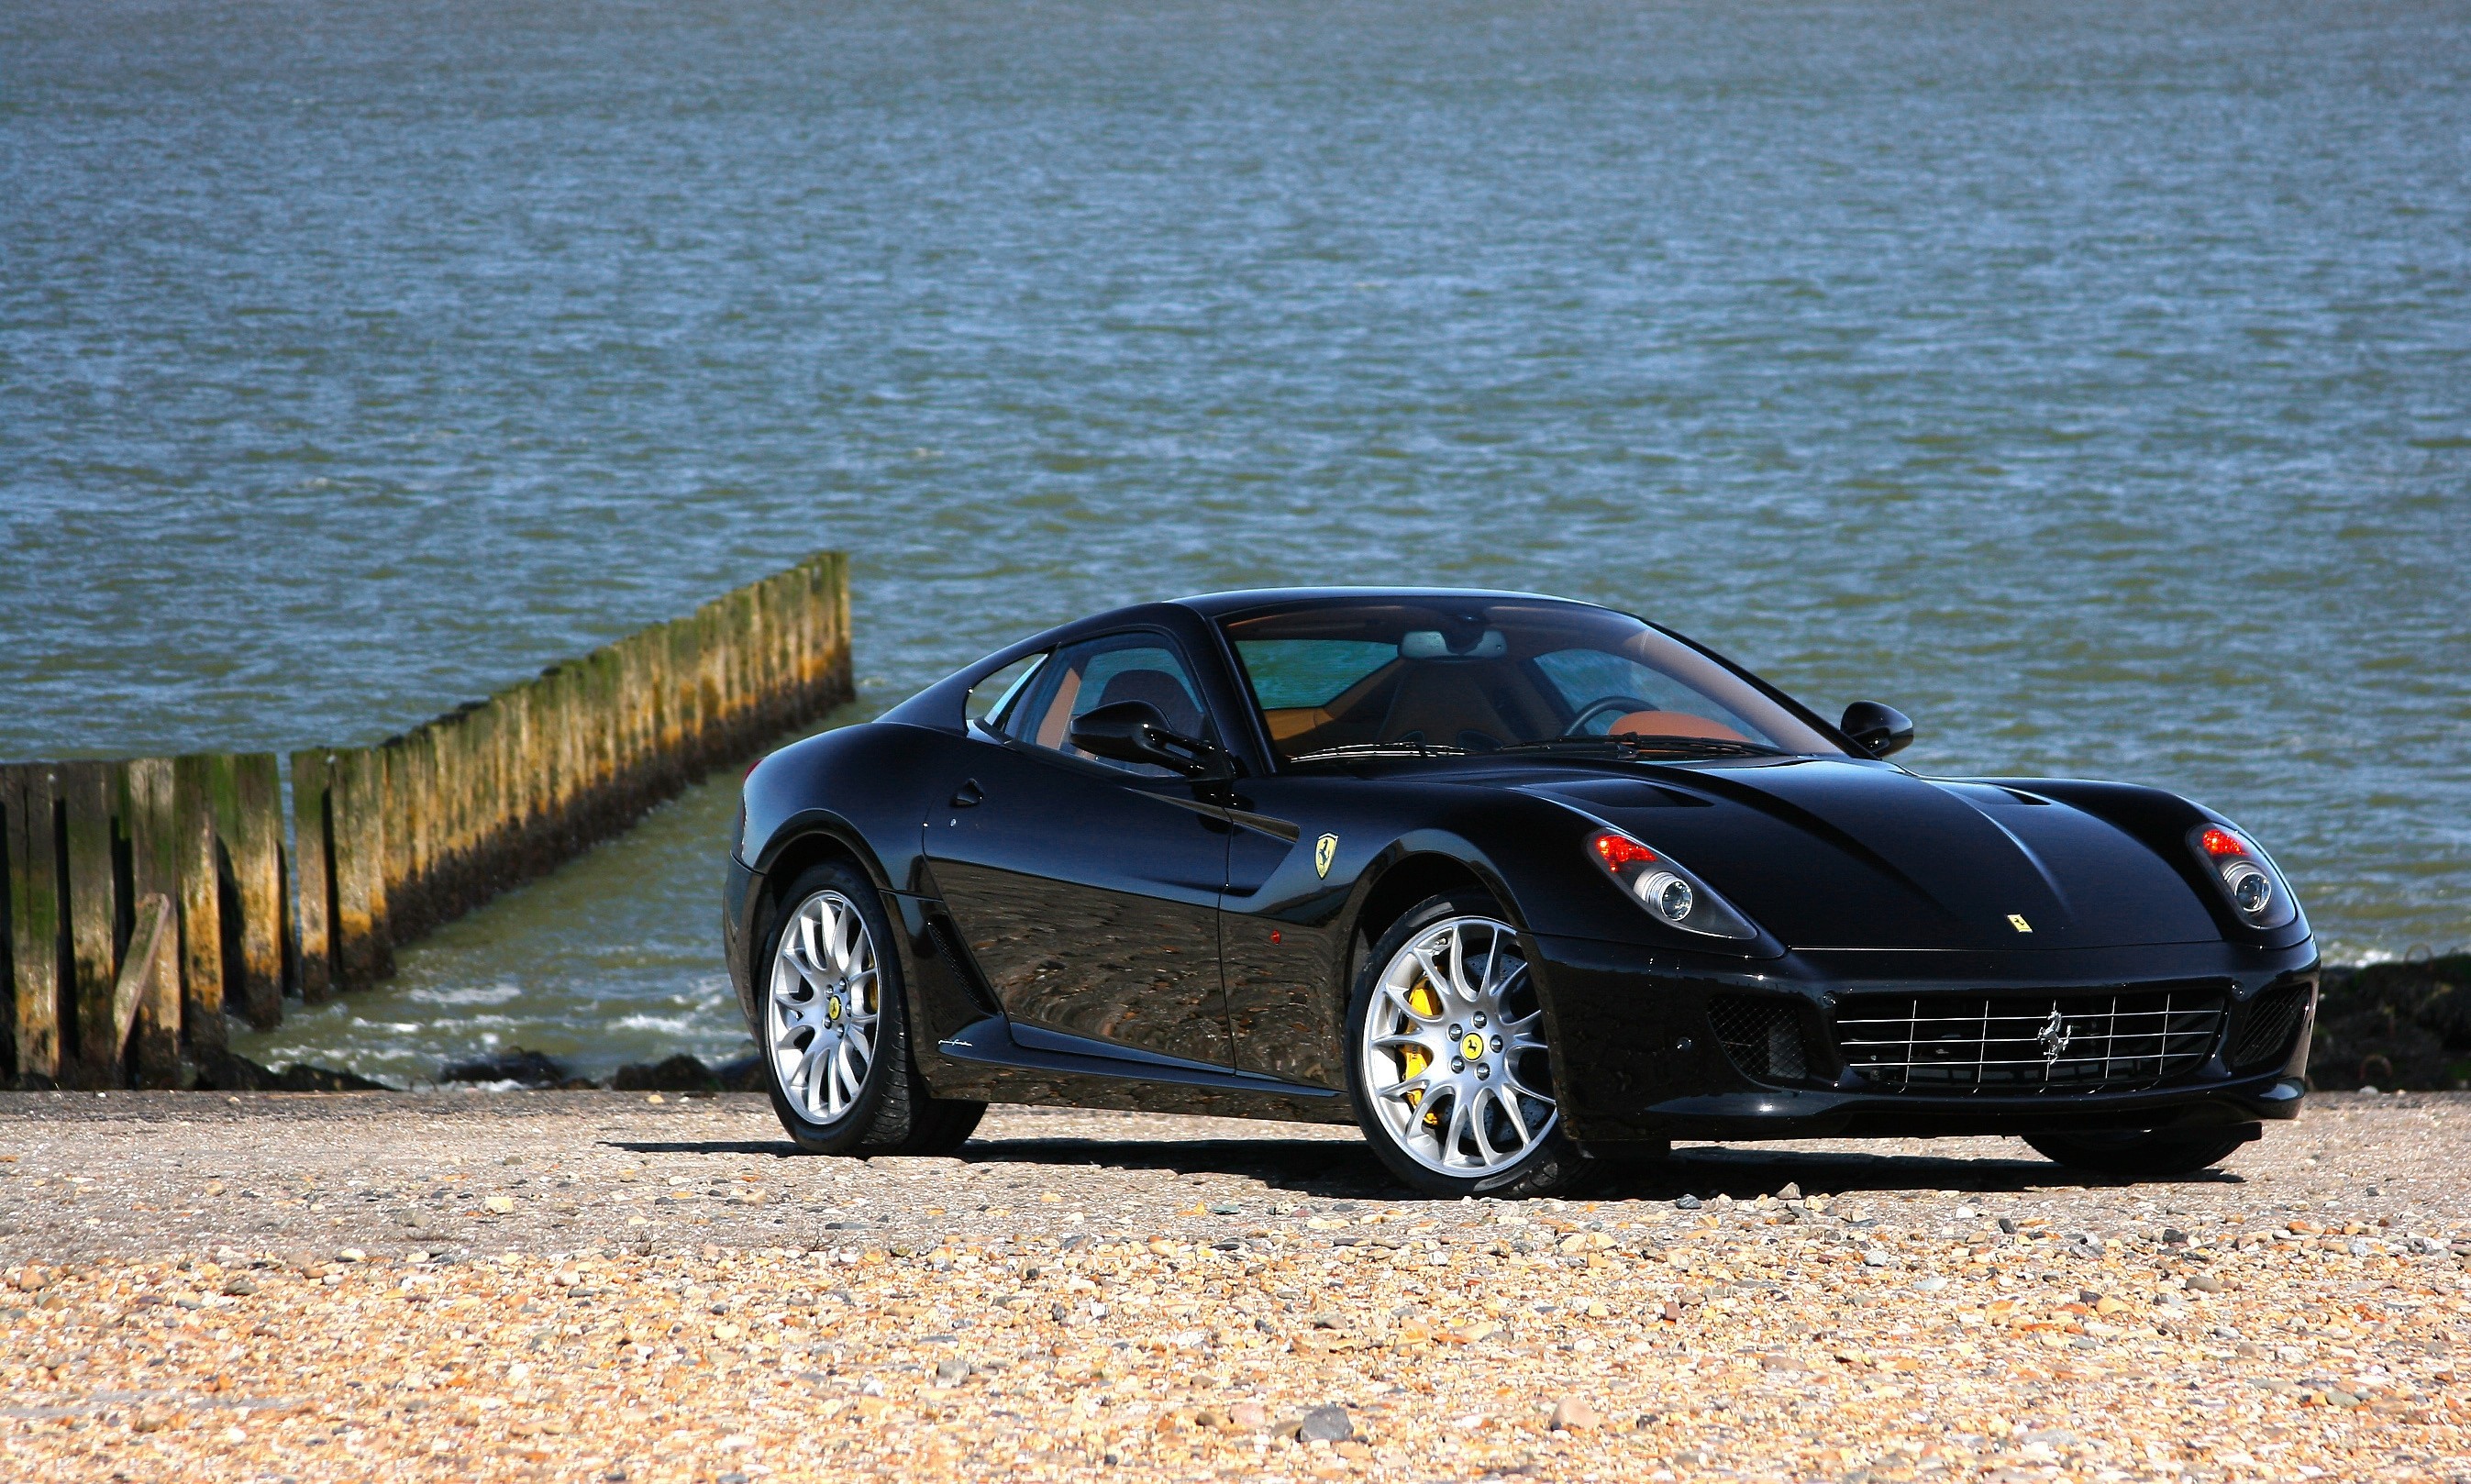 cars, shore, front view, black collection of HD images